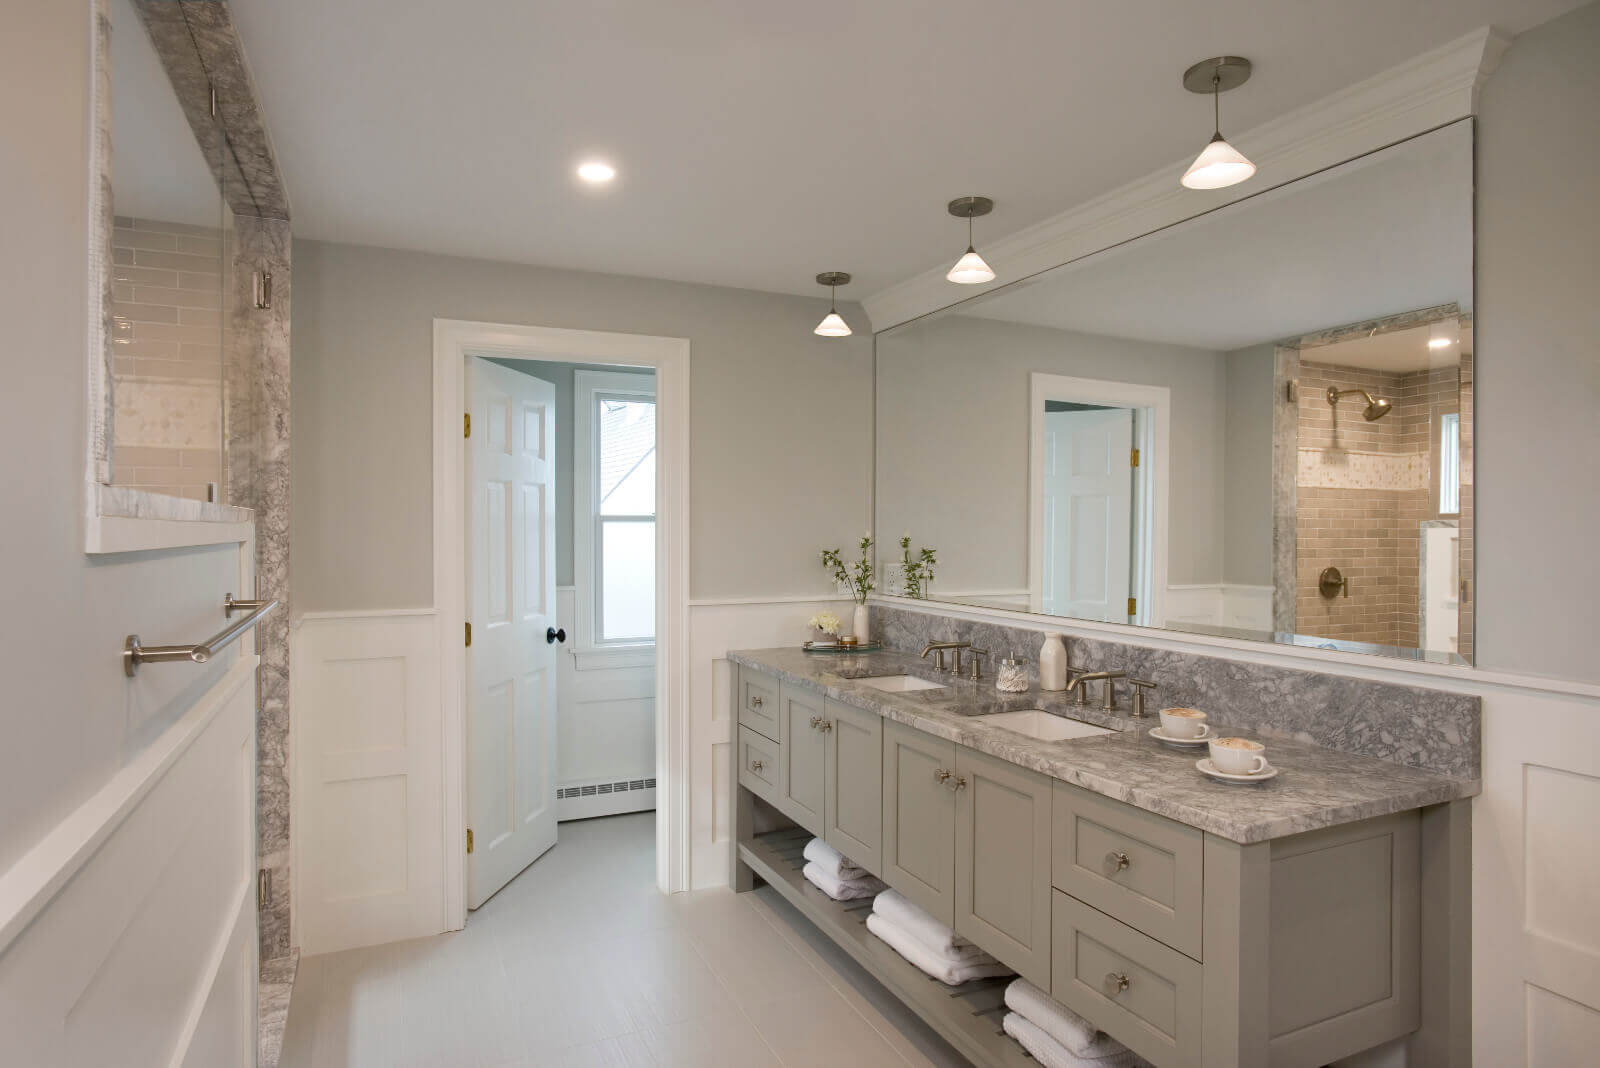 How Much Does A Bathroom Remodel Cost?